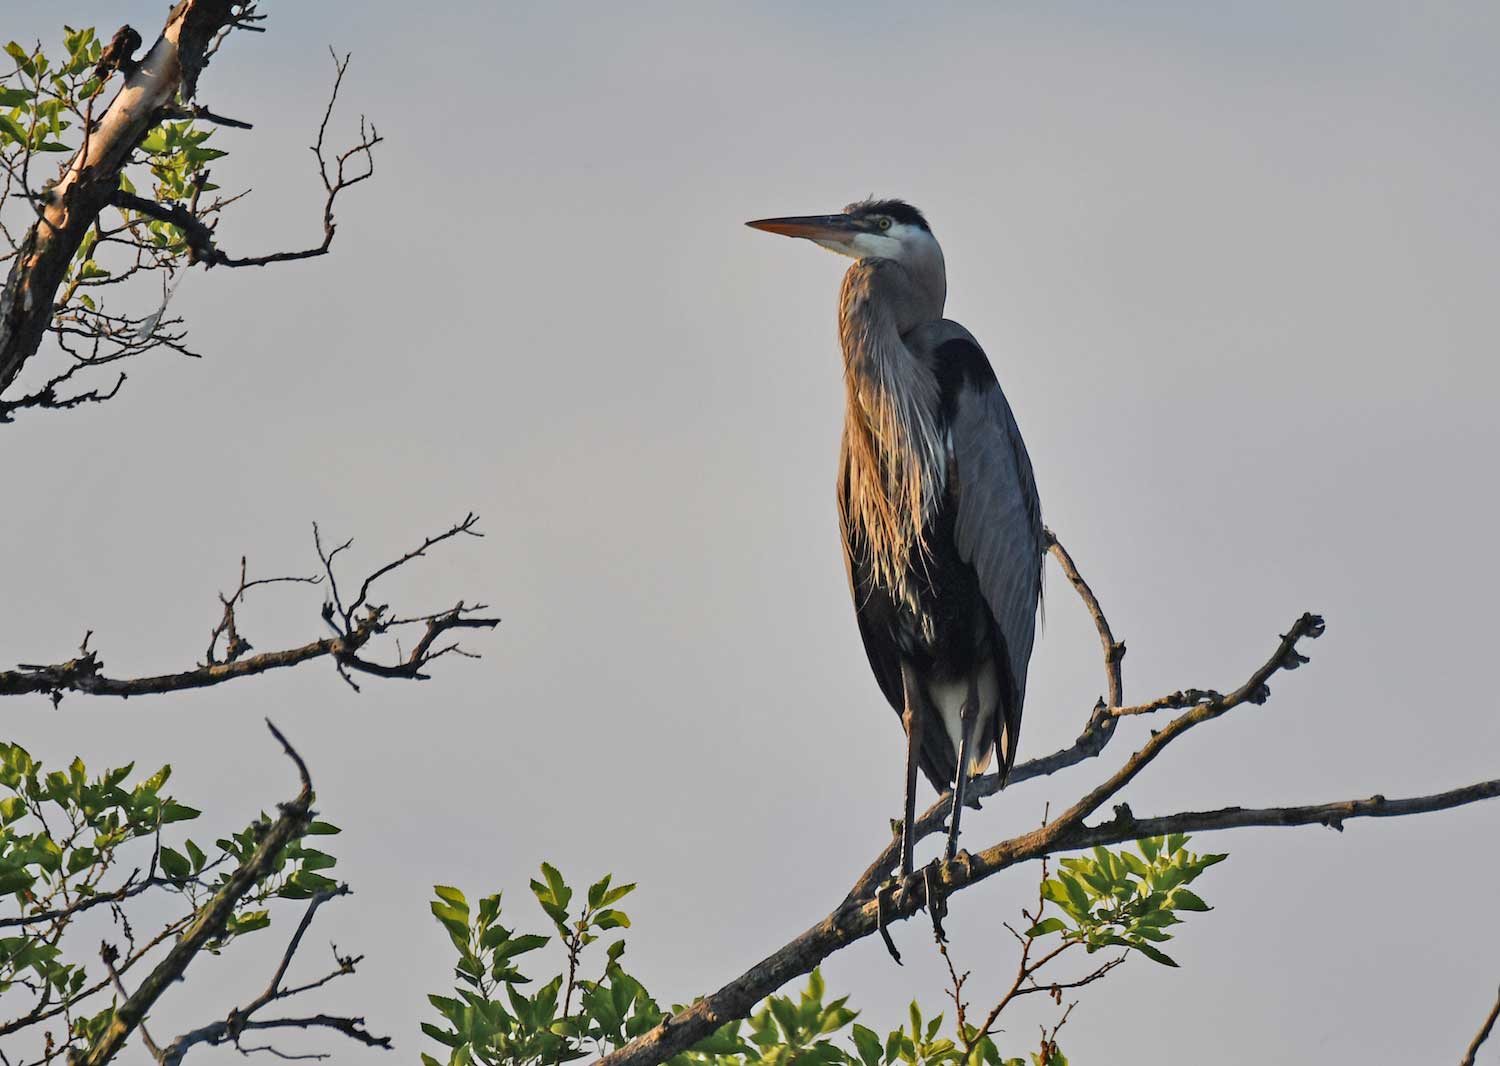 A great blue heron standing on a tree branch.